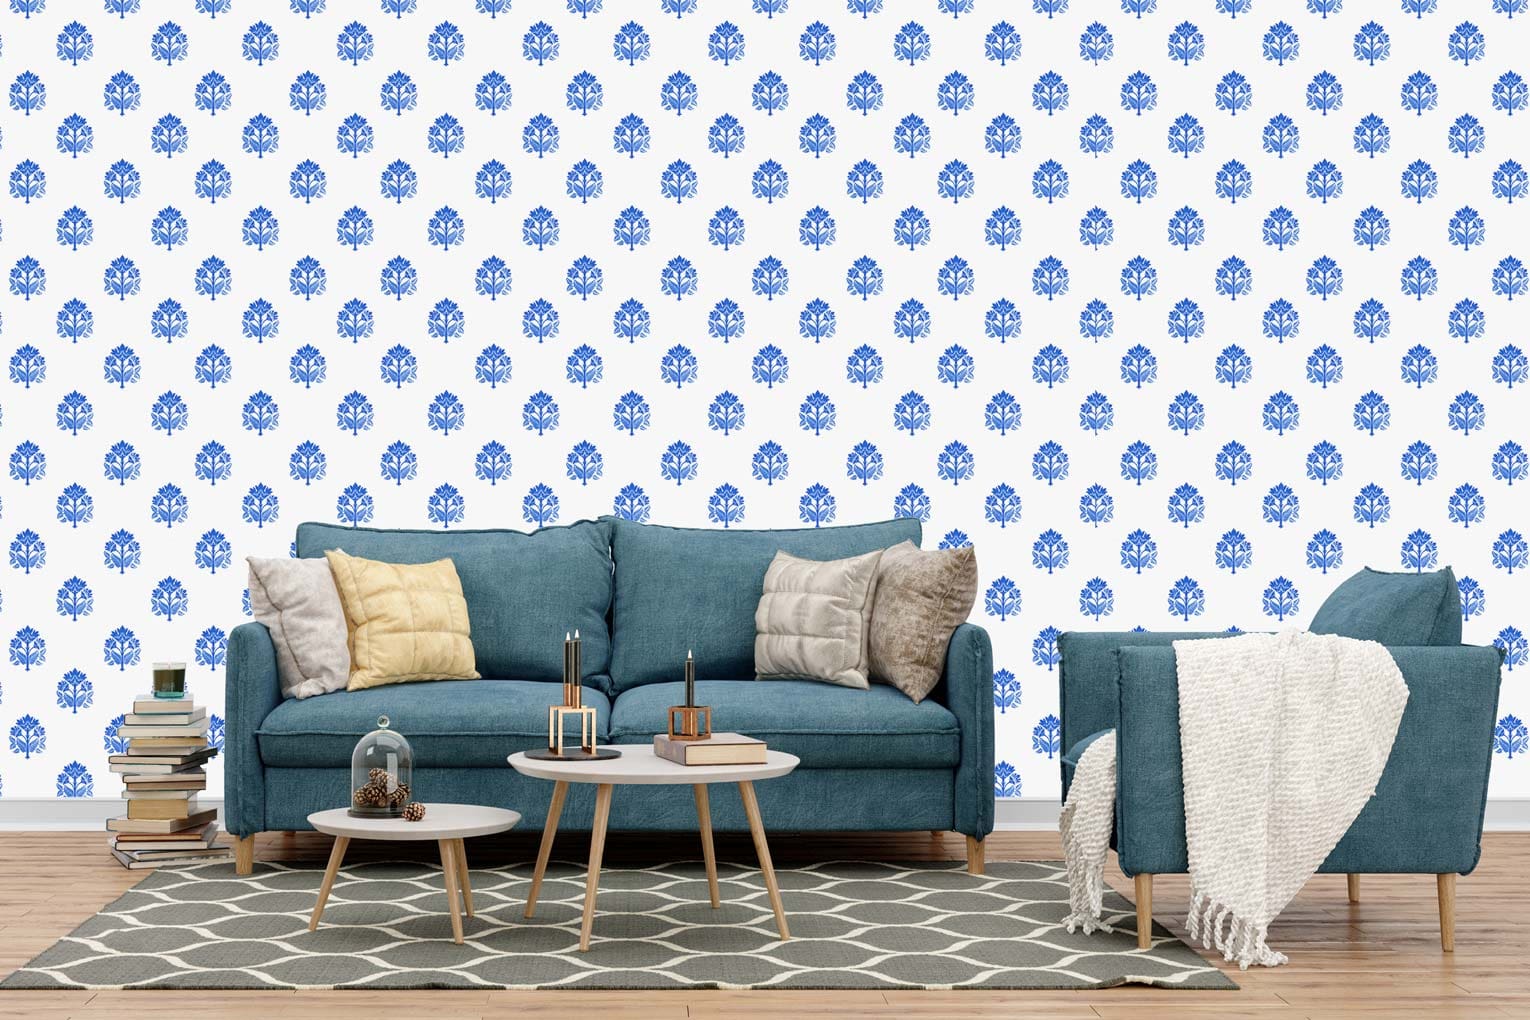 Blue Abstract Wallpaper Design for Rooms  lifencolors